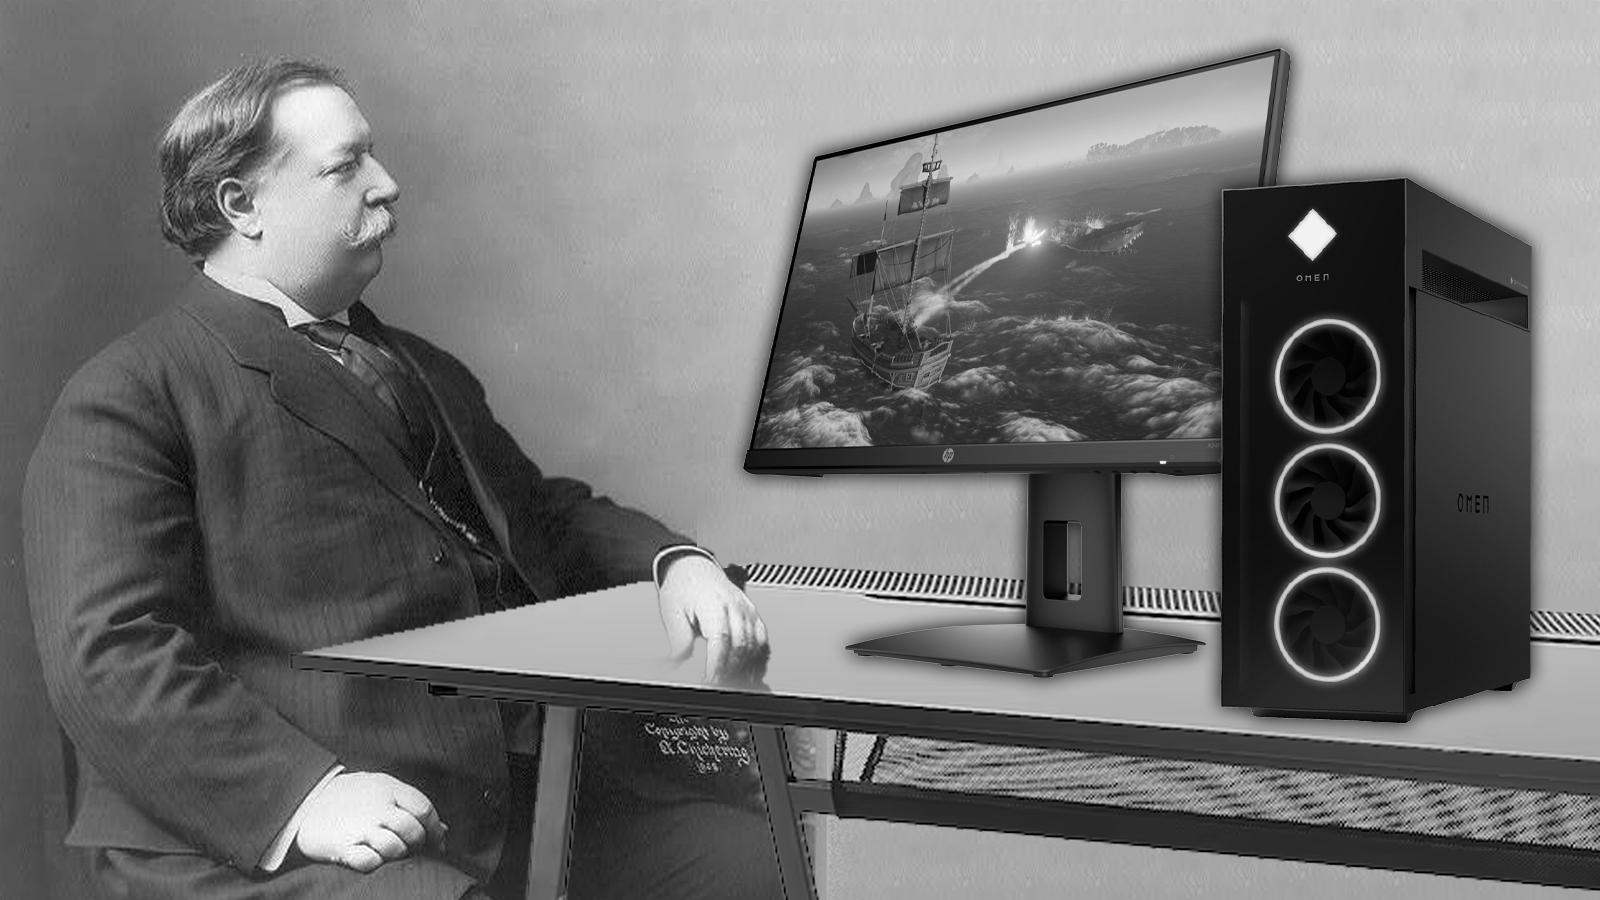 Taft playing games on his HP PC